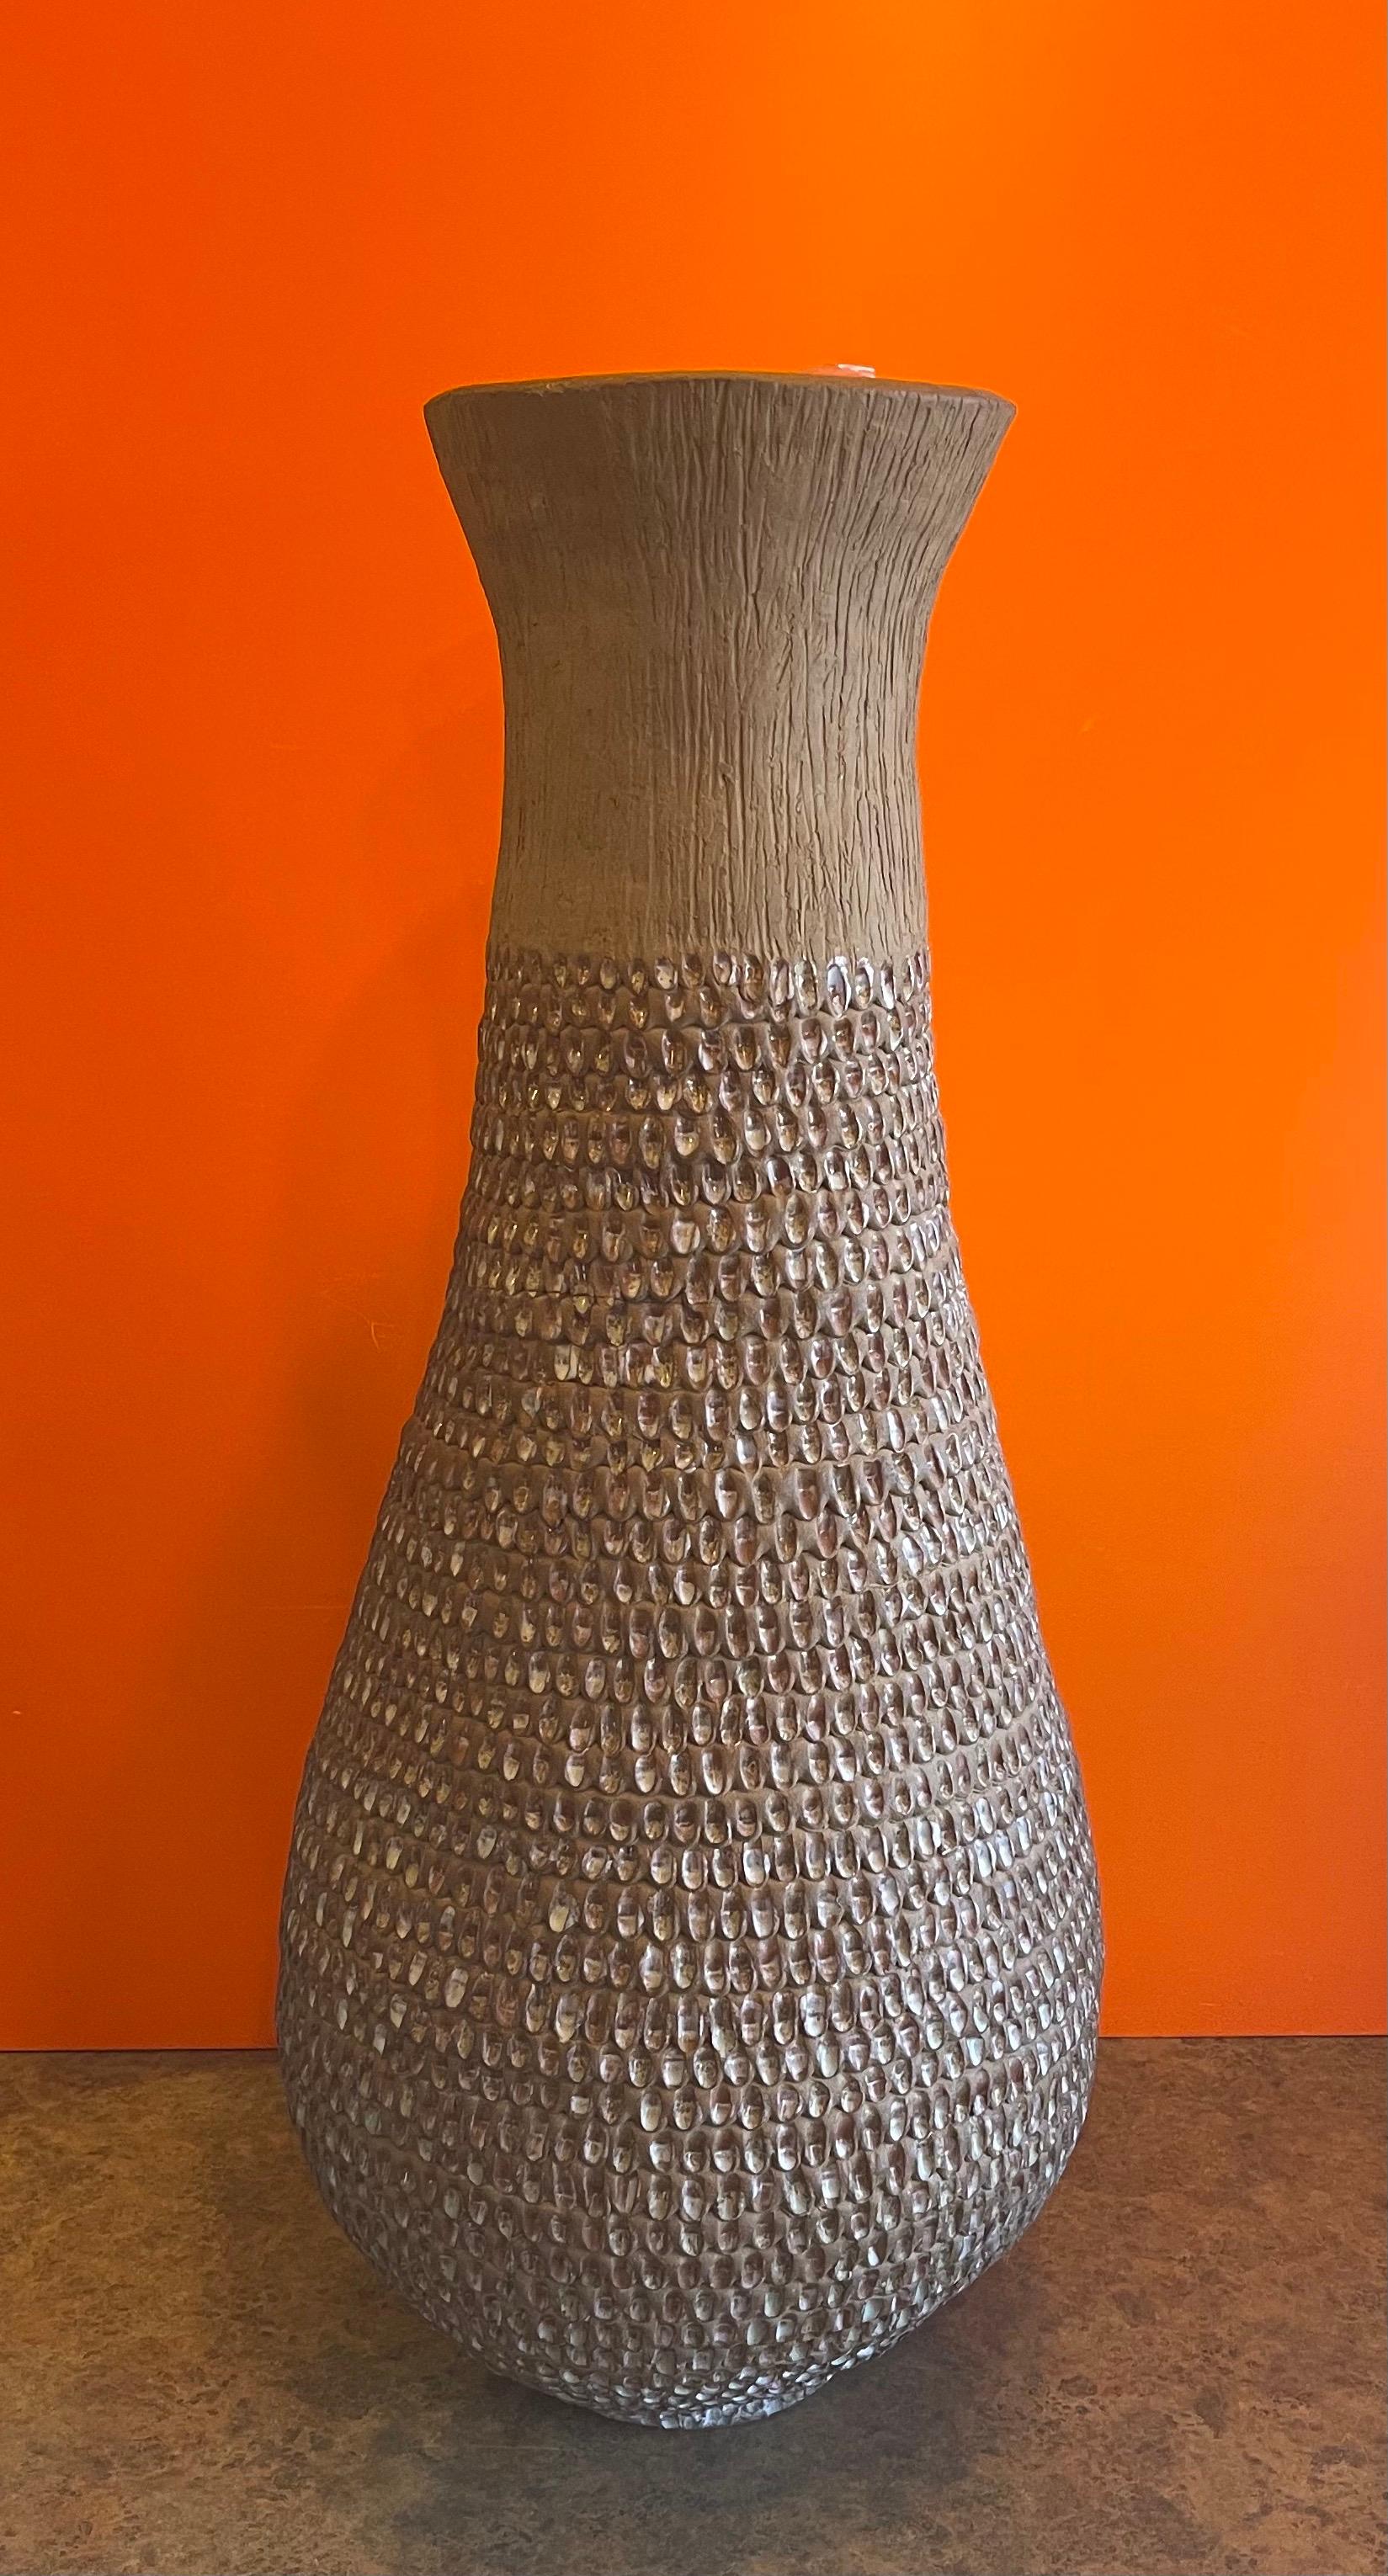 Hand-Crafted Massive Earthenware Pottery Vase in the Style of David Cressey / Robert Maxwell